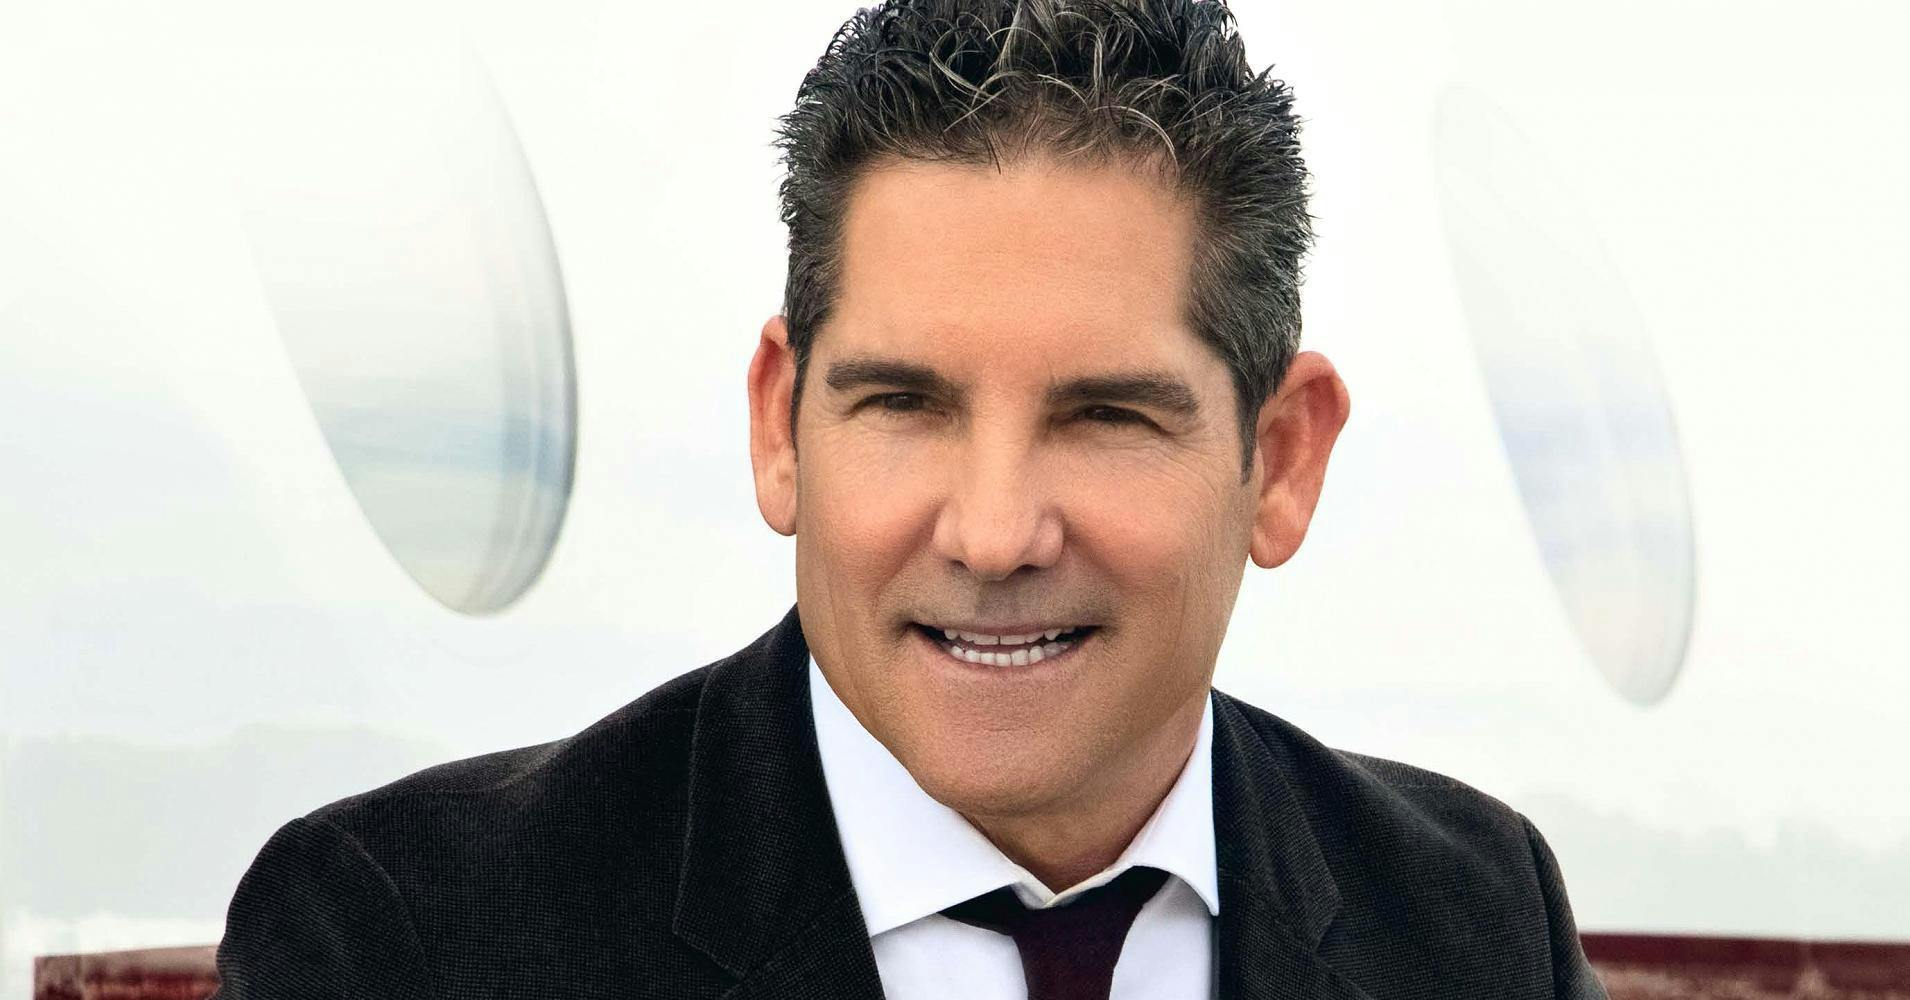 10 X Your Business with Grant Cardone and TLG